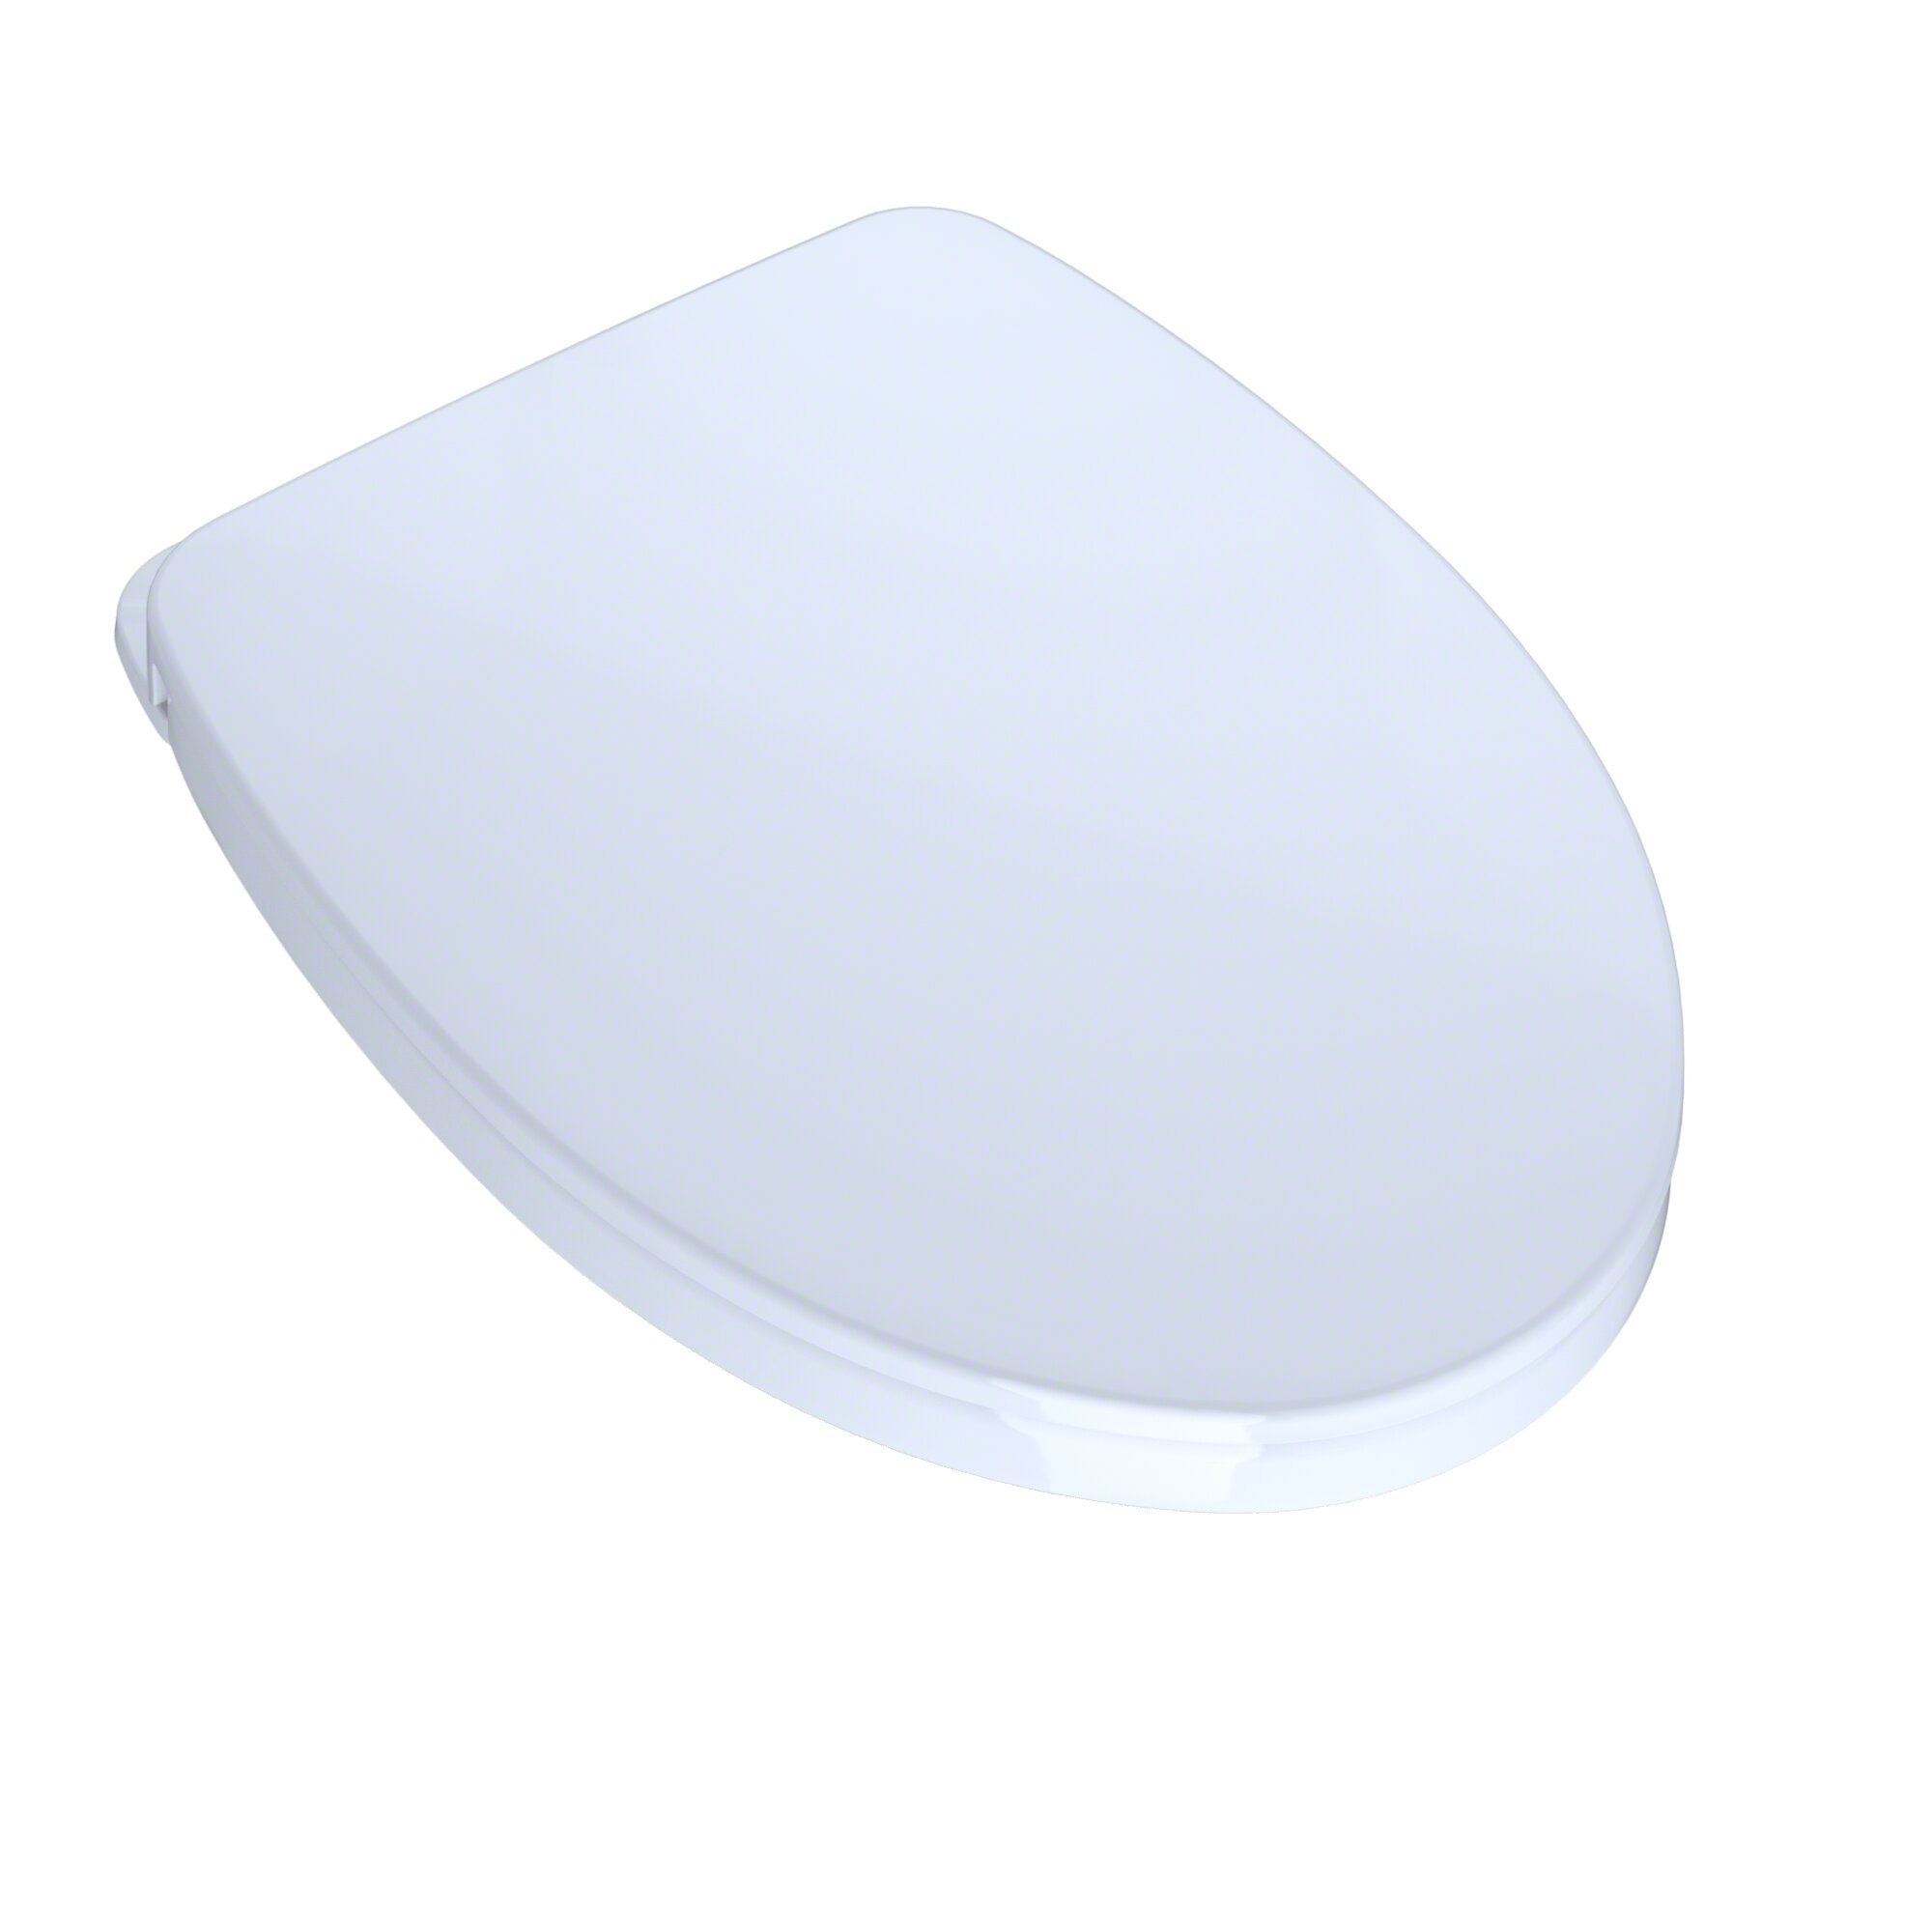 TOTO SS124#01 SoftClose Elongated Toilet Seat White for sale online 